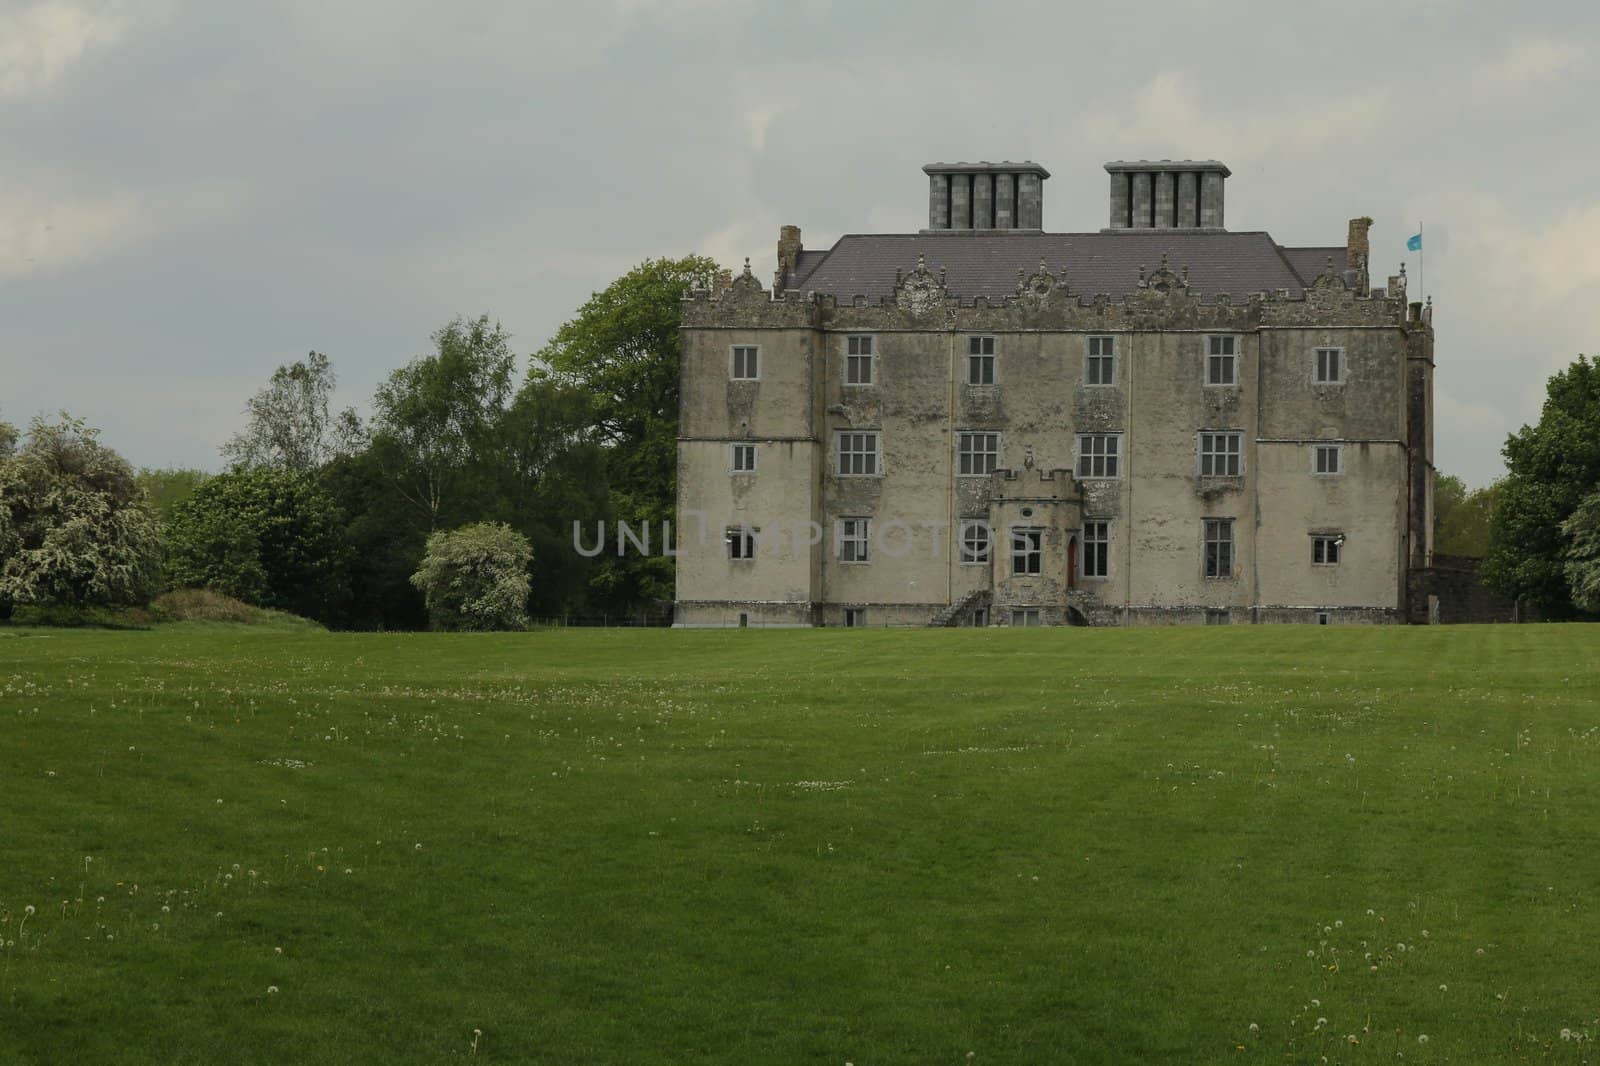 Portumna Castle in Ireland, with view of the garden. The castle is a semi-fortified house built before 1618.
